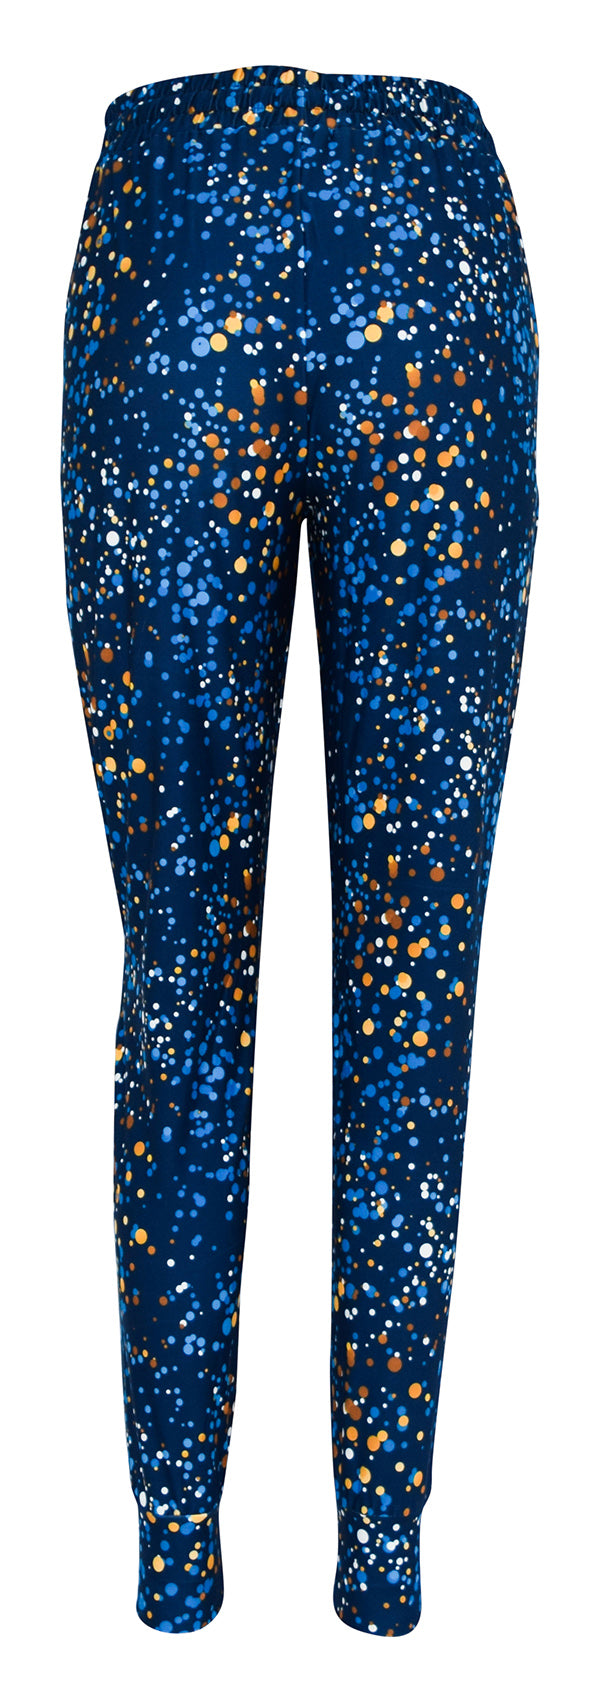 Space Galaxy Lejoggers-Joggers